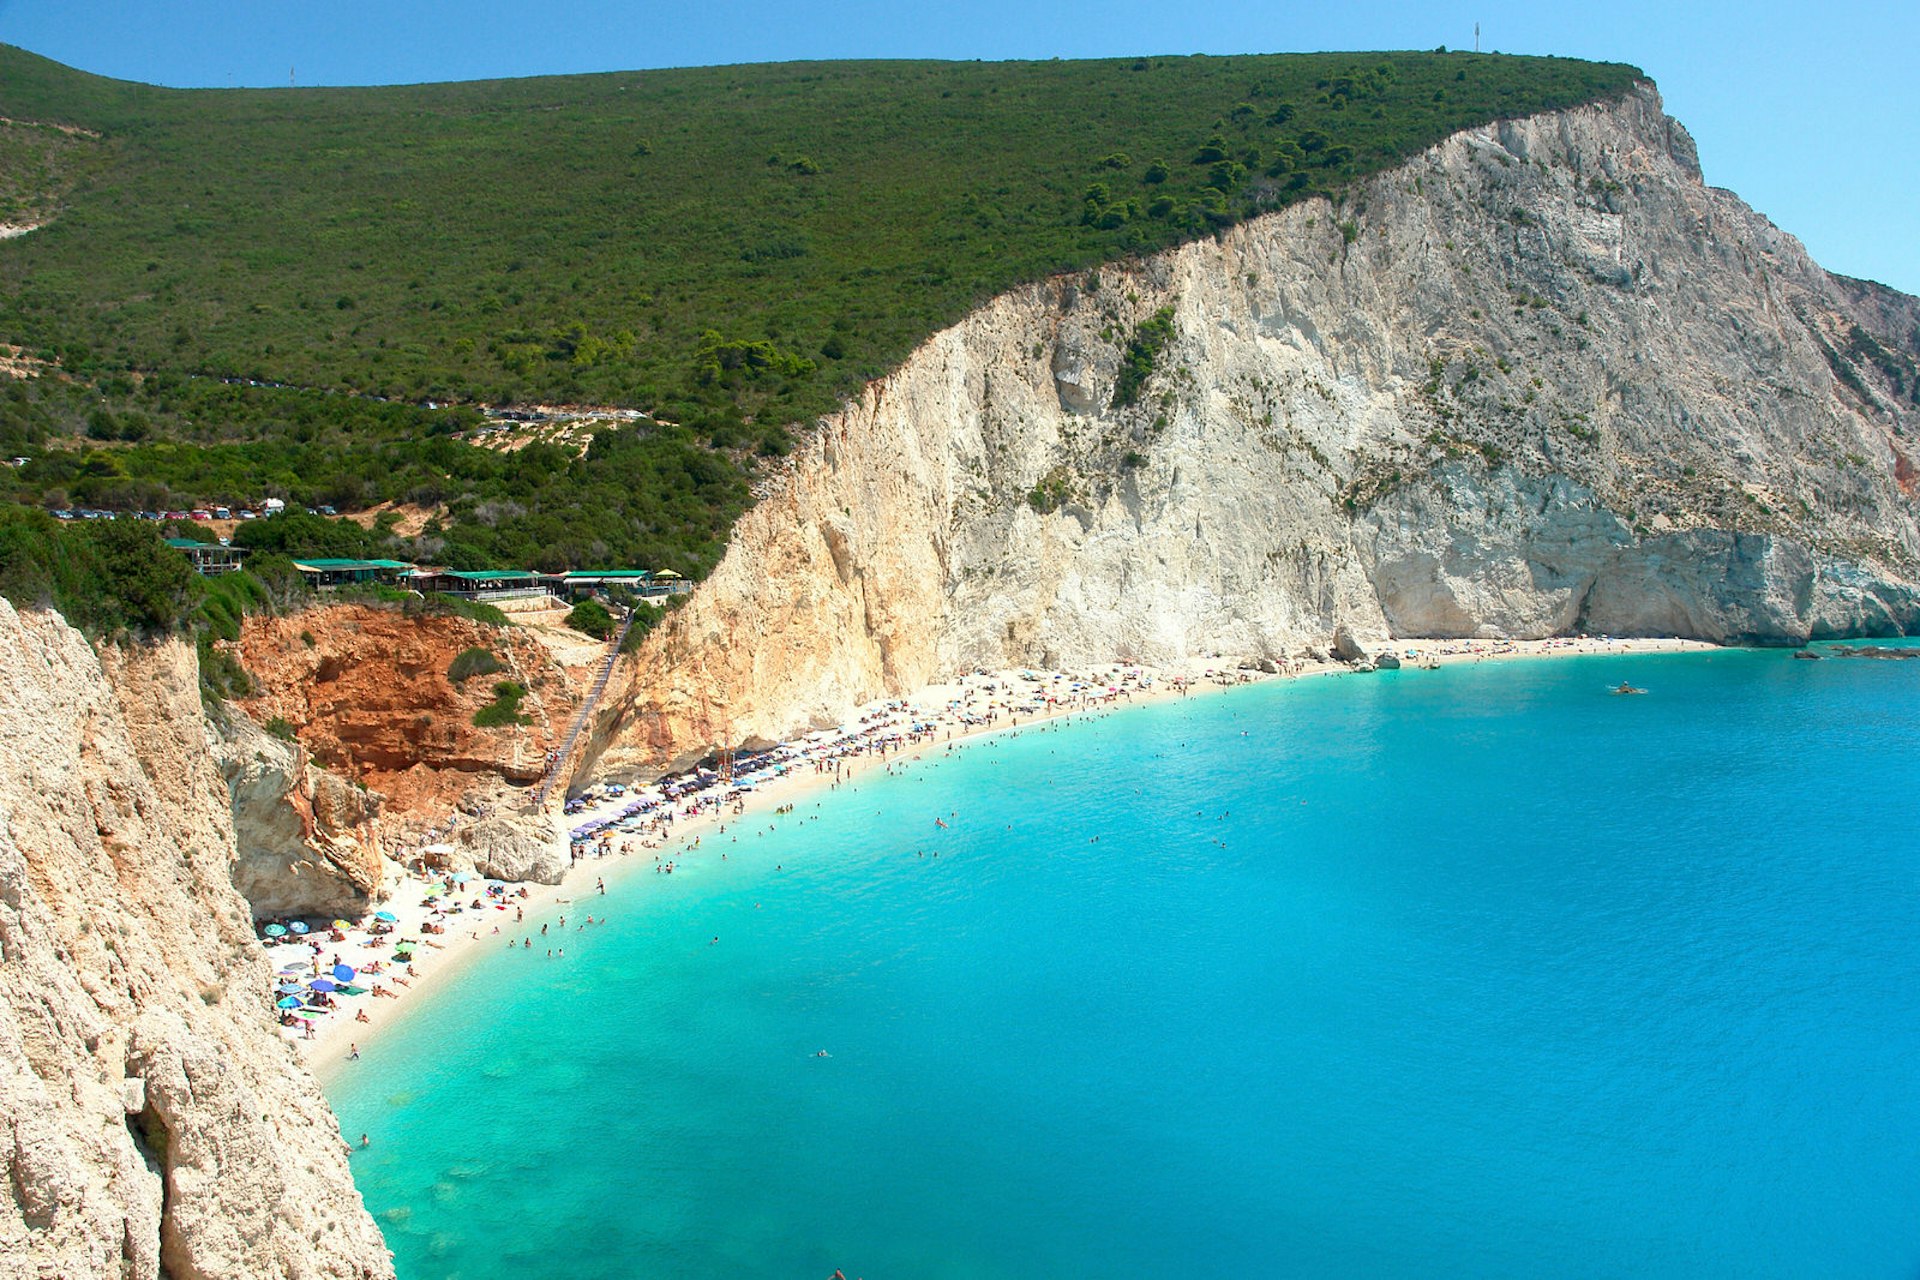 The golden sands backed by cliffs, and the turquoise waters of Katsiki beach, Lefkada, Greece